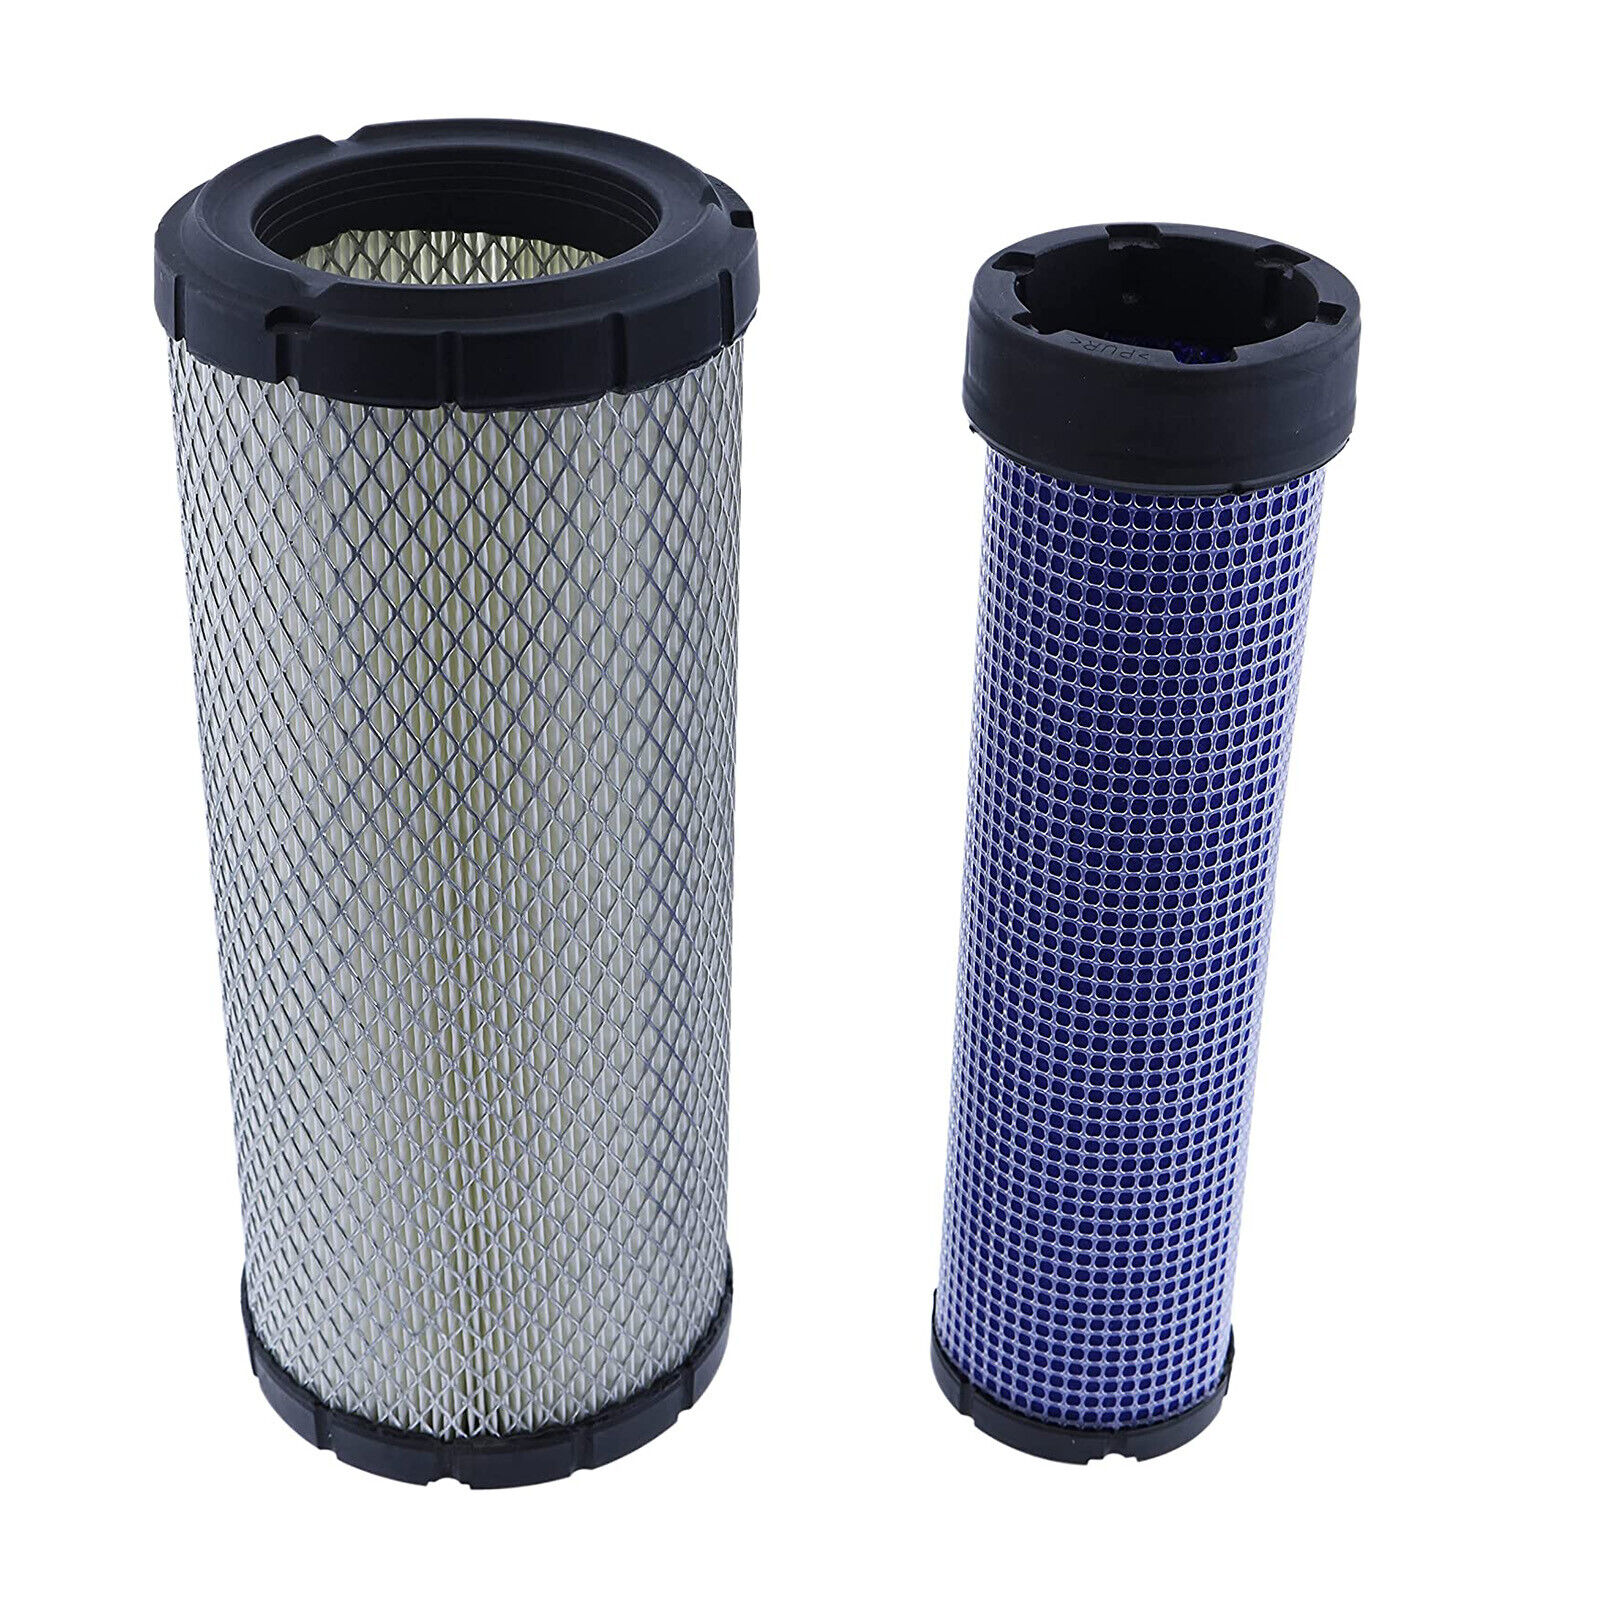 Air Filter Kit 006000455F1 006000456F1 for Mahindra Tractor 4025 4500 5500 6000